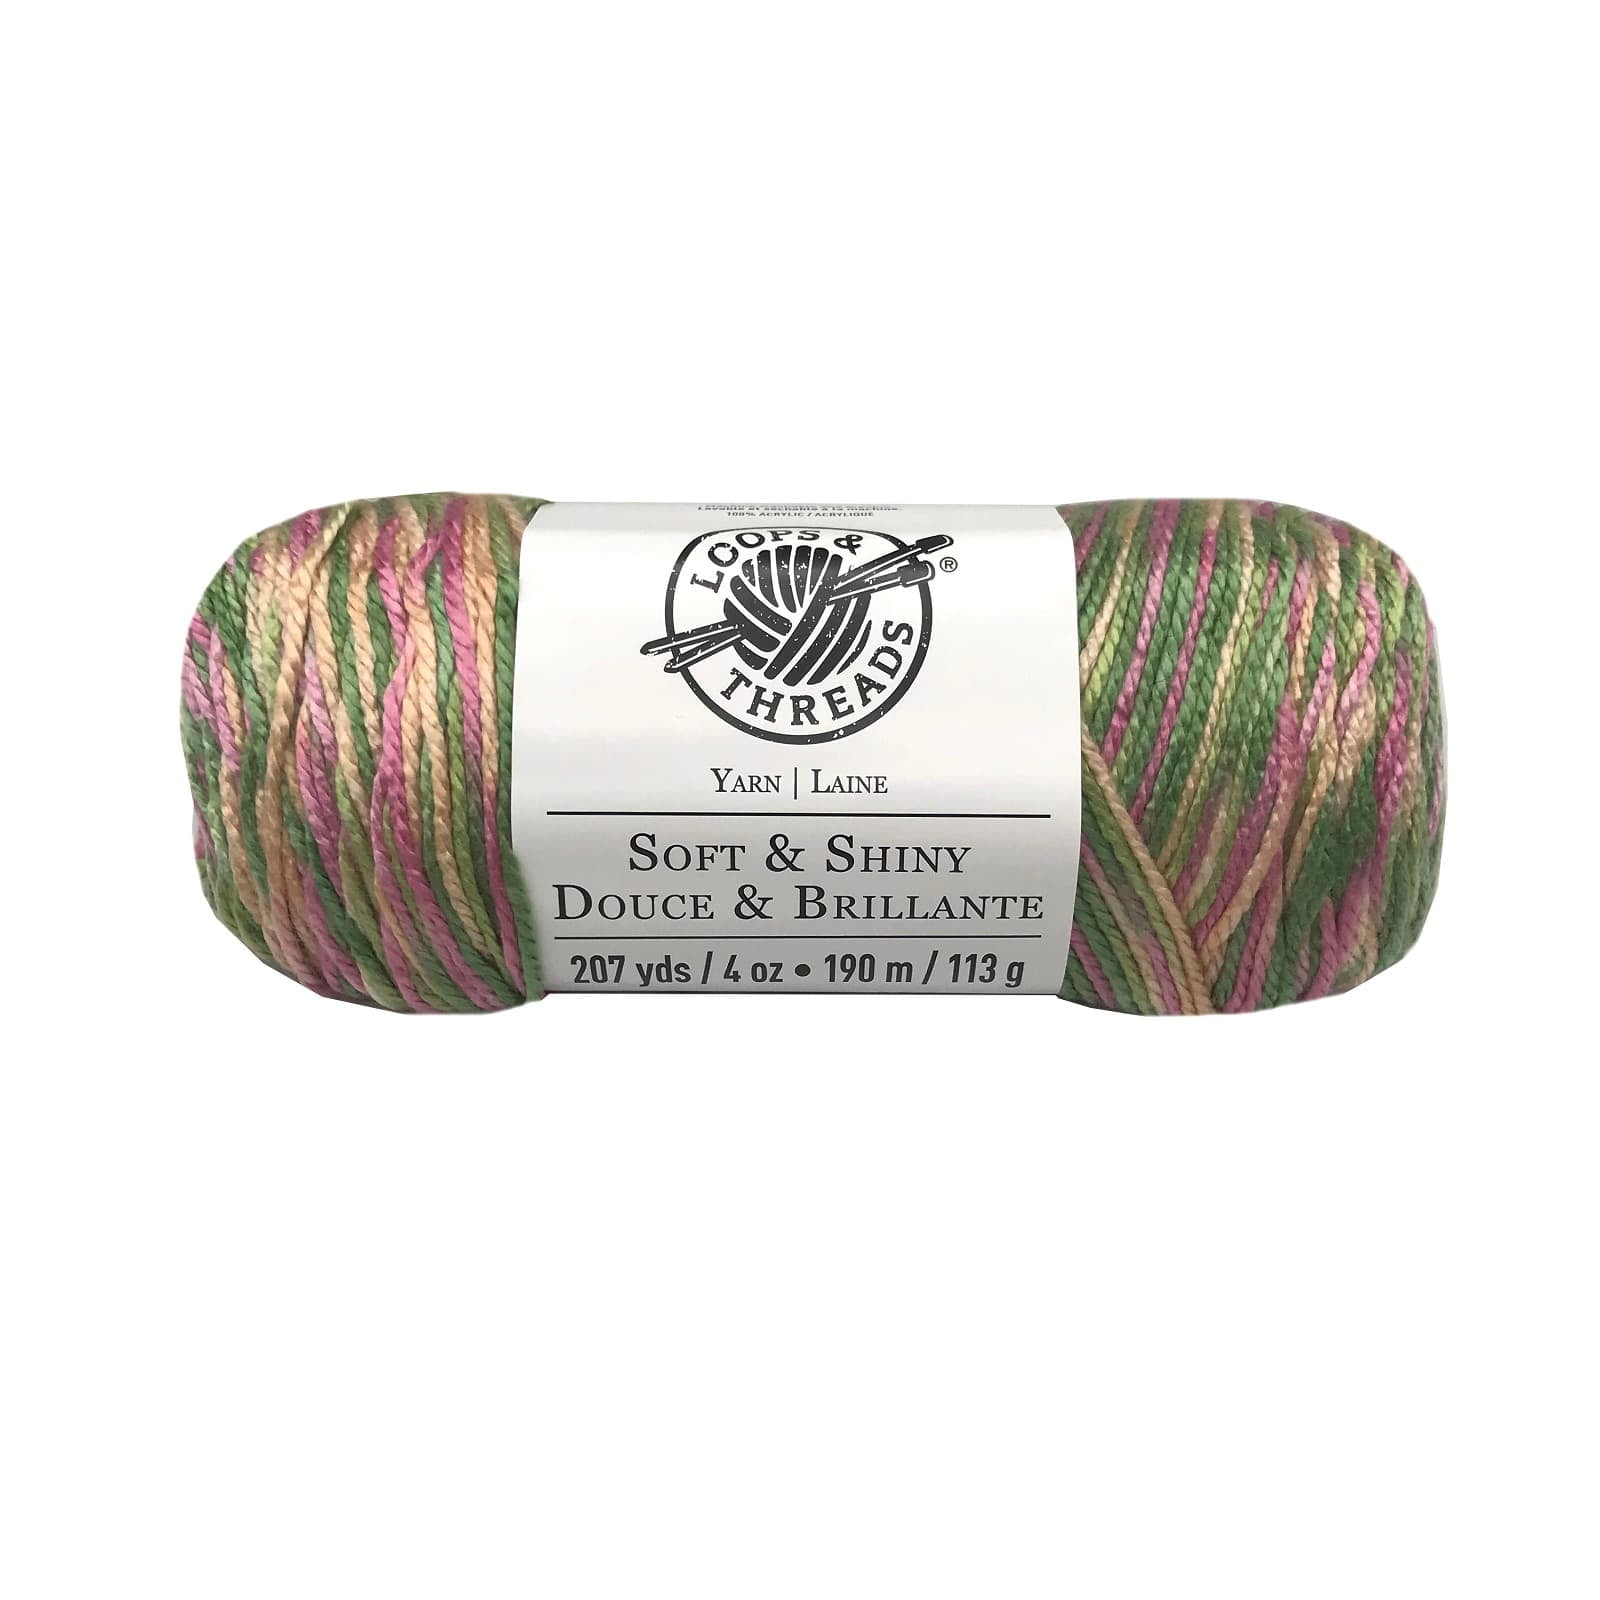 Soft Classic Multi Ombre Yarn by Loops & Threads - Multicolor Yarn for  Knitting, Crochet, Weaving, Arts & Crafts - Bluebird, Bulk 12 Pack 